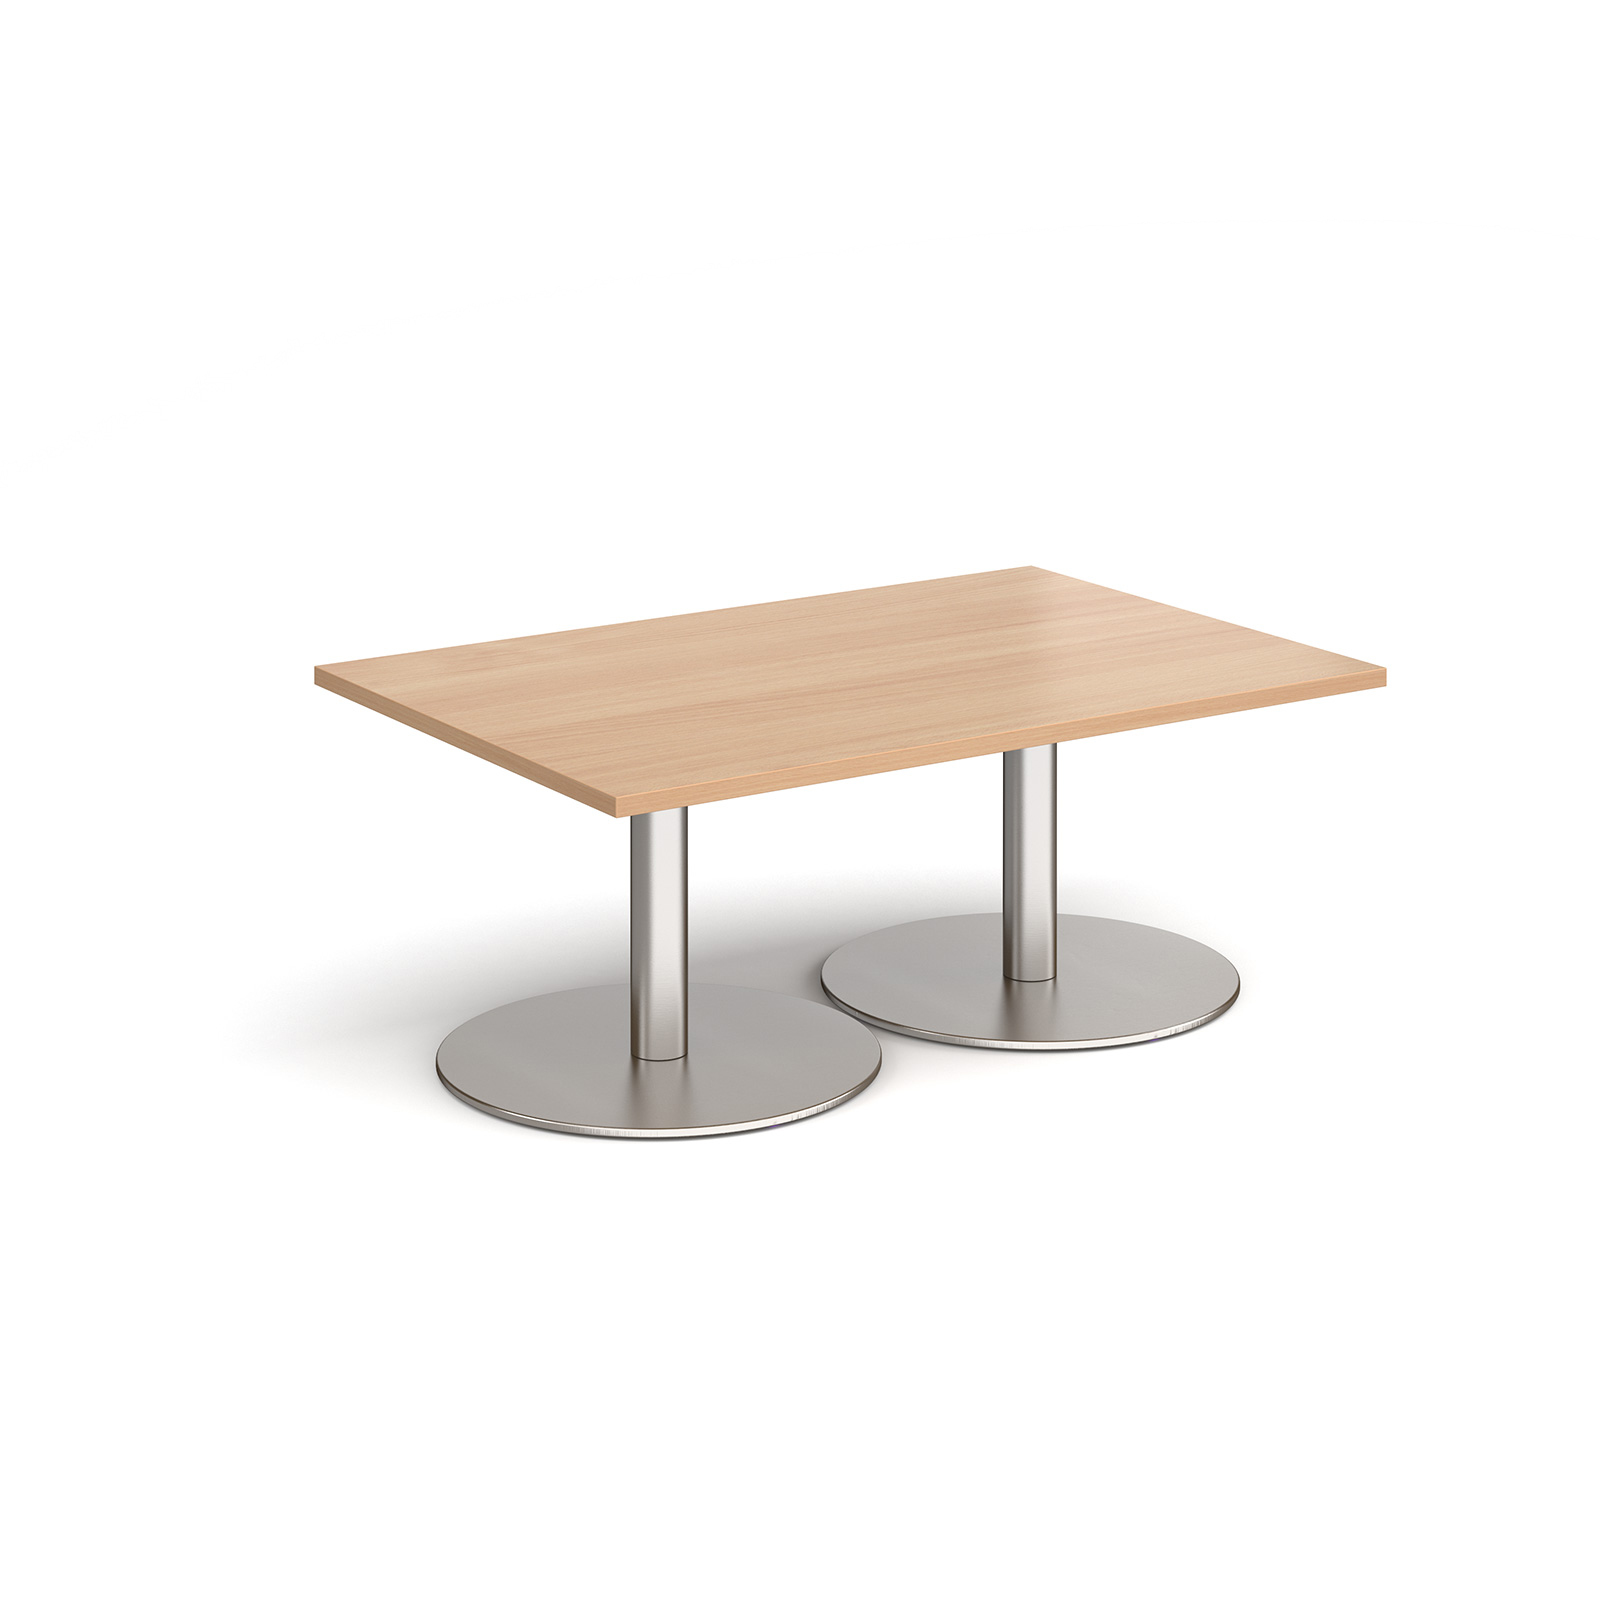 Monza rectangular coffee table with flat round brushed steel bases 1200mm x 800mm - beech